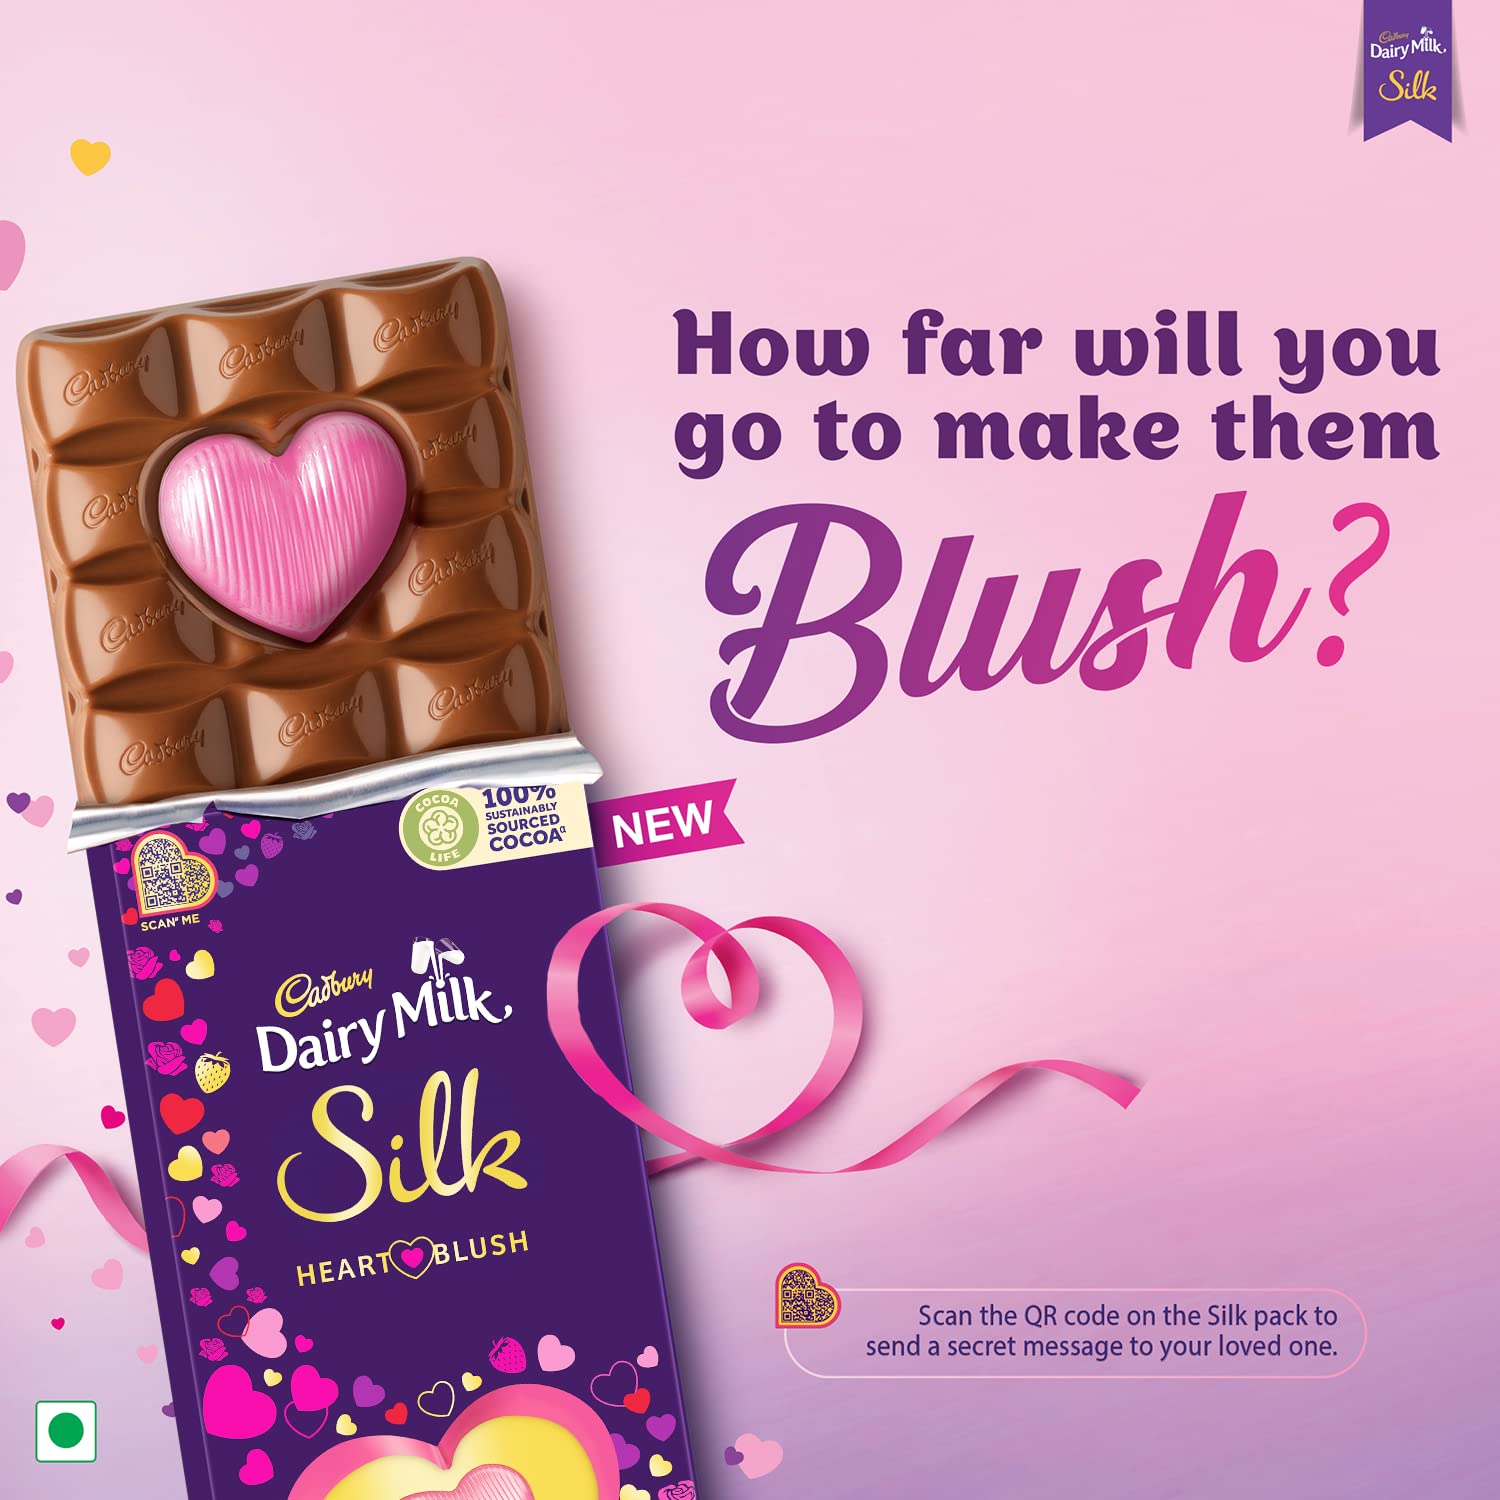 Cadbury Silk Gifting | Cadbury | A one-of-a-kind gift for that  one-in-a-million person. Log on to www.cadburygifting.in for exciting  personalized gift packs | By Cadbury Dairy Milk Silk GiftingFacebook